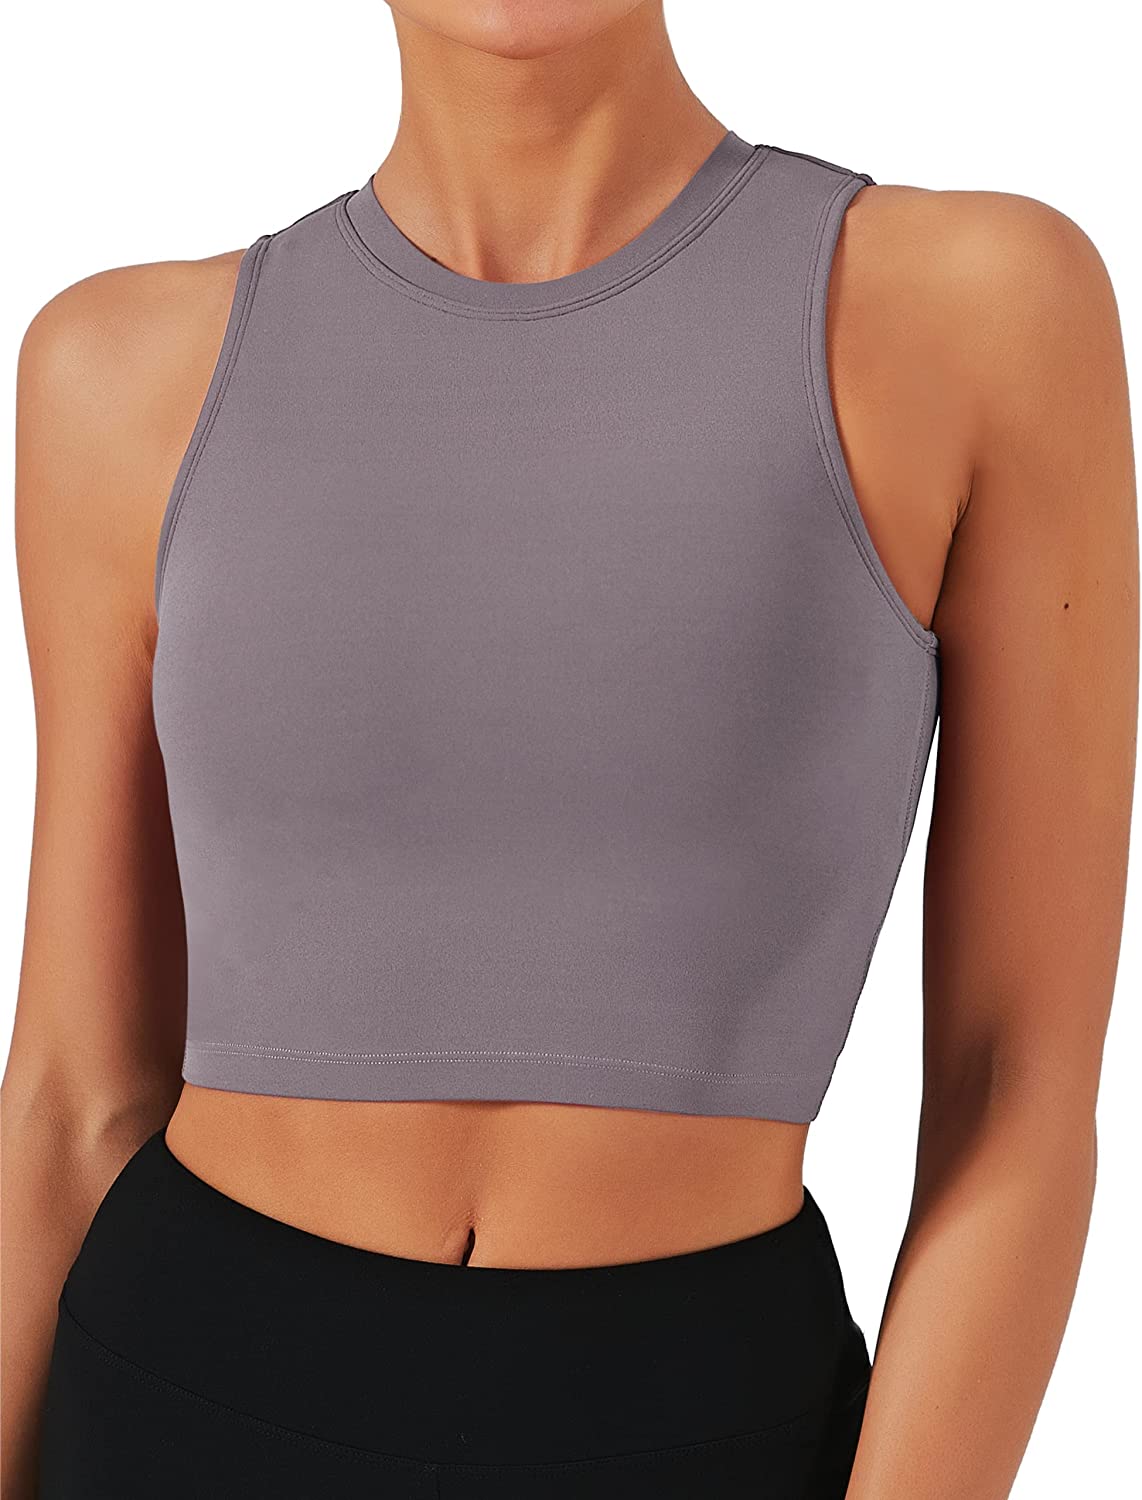  Womens Sport Bras High Neck Removable Padded Yoga